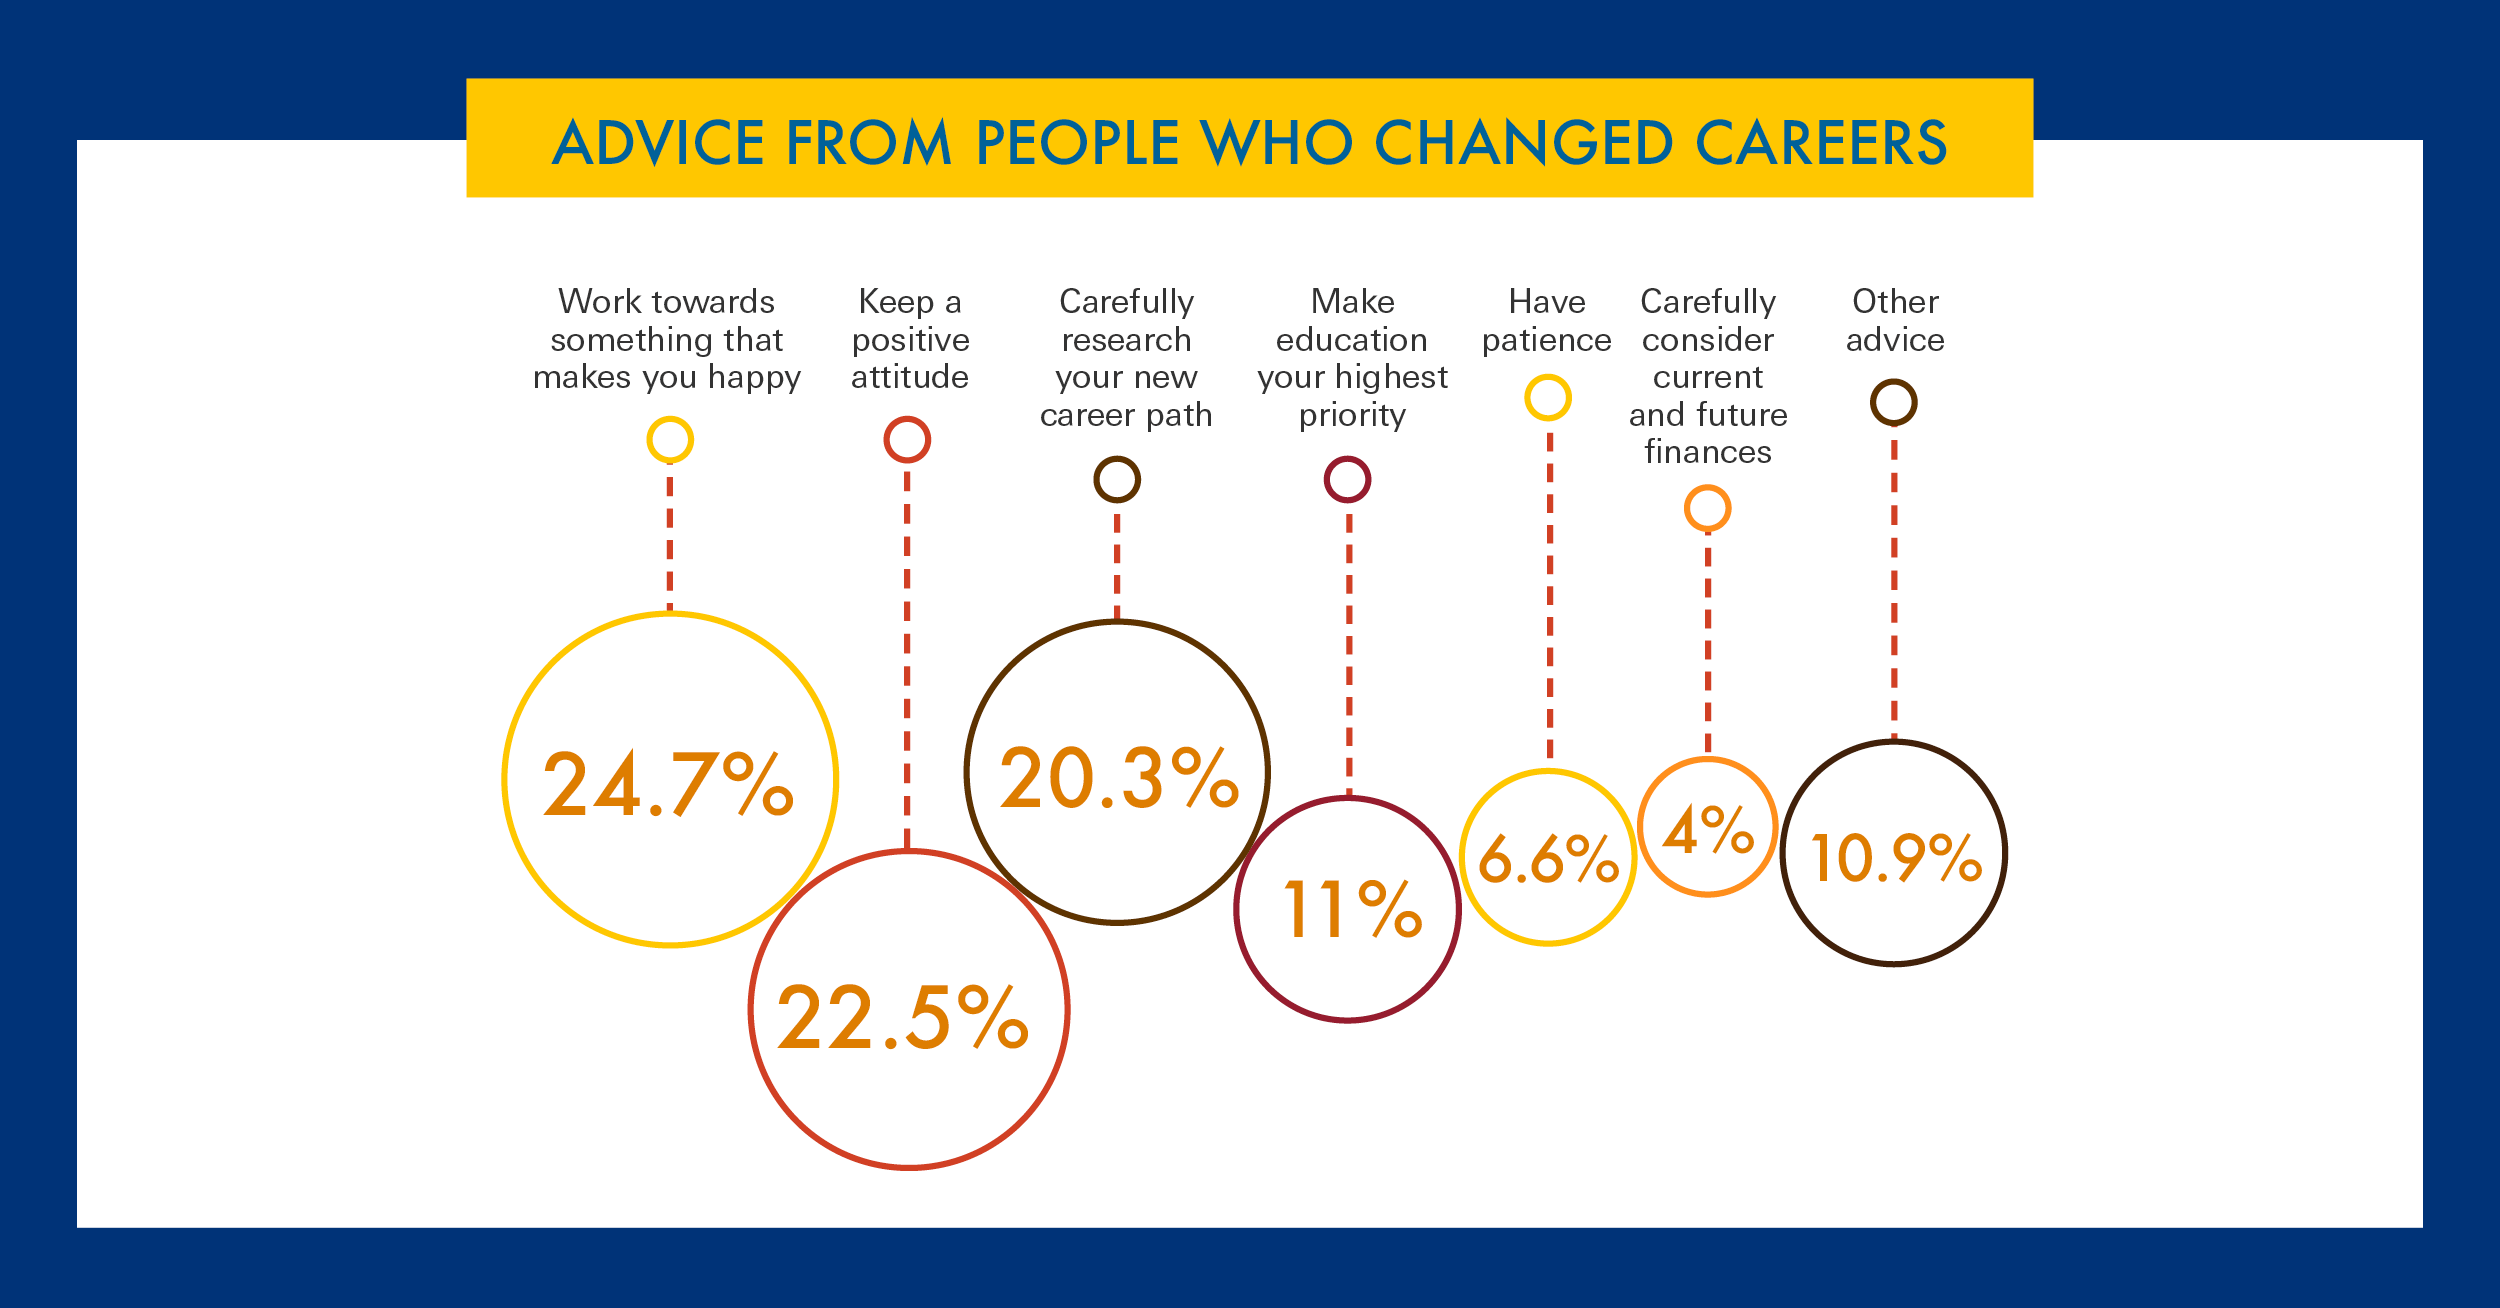 Advice from people who changed careers